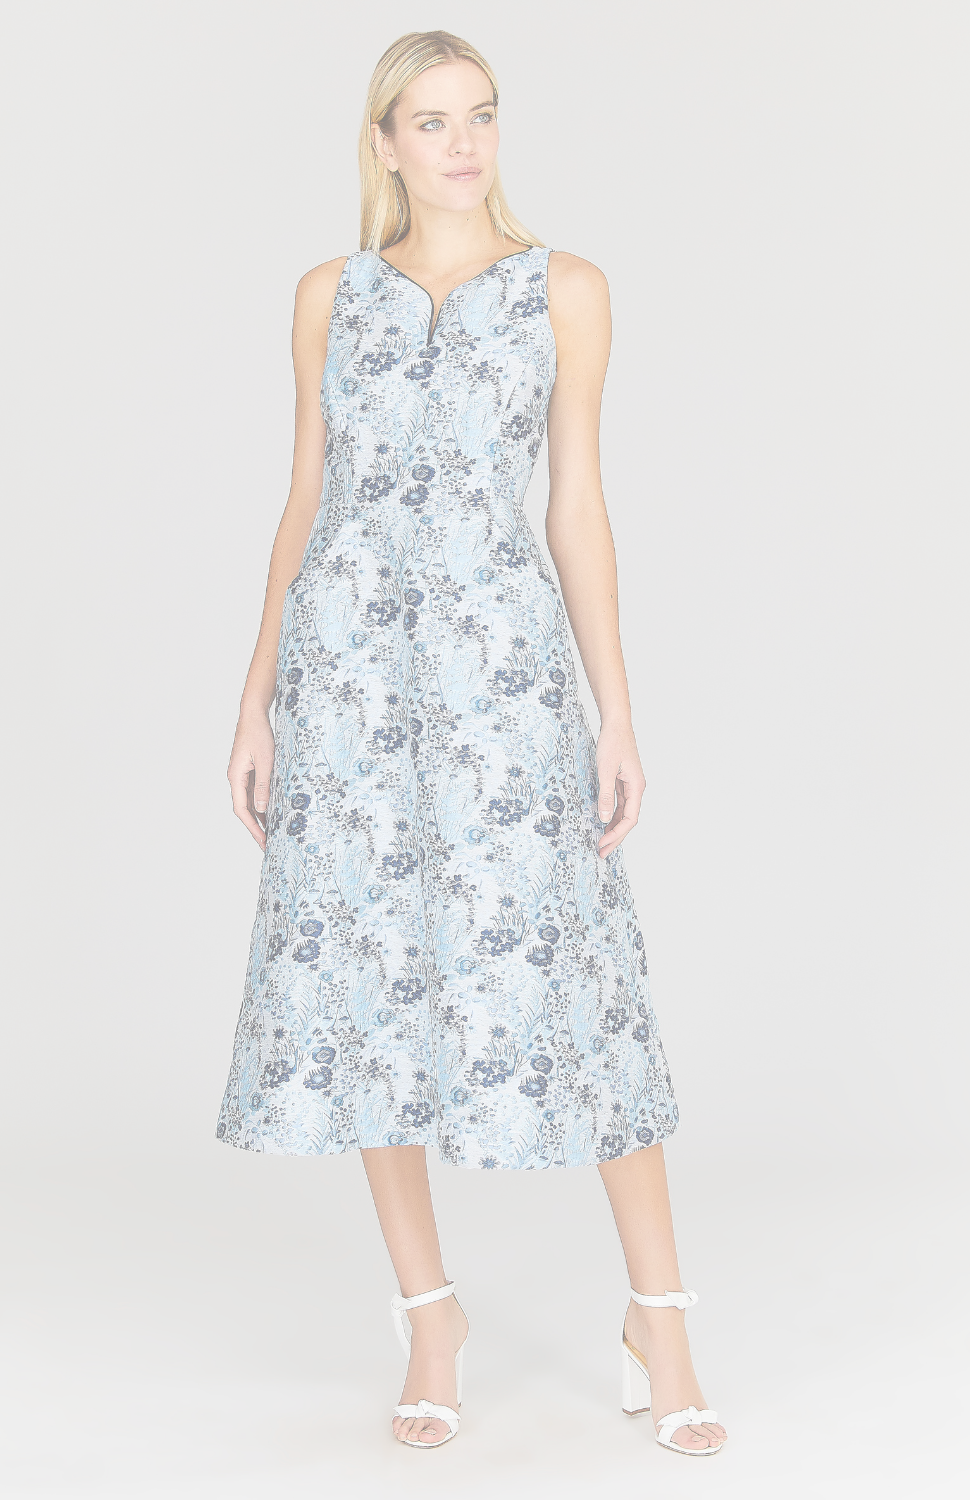 Dimensional Floral Sleeveless Fit & Flare Dress